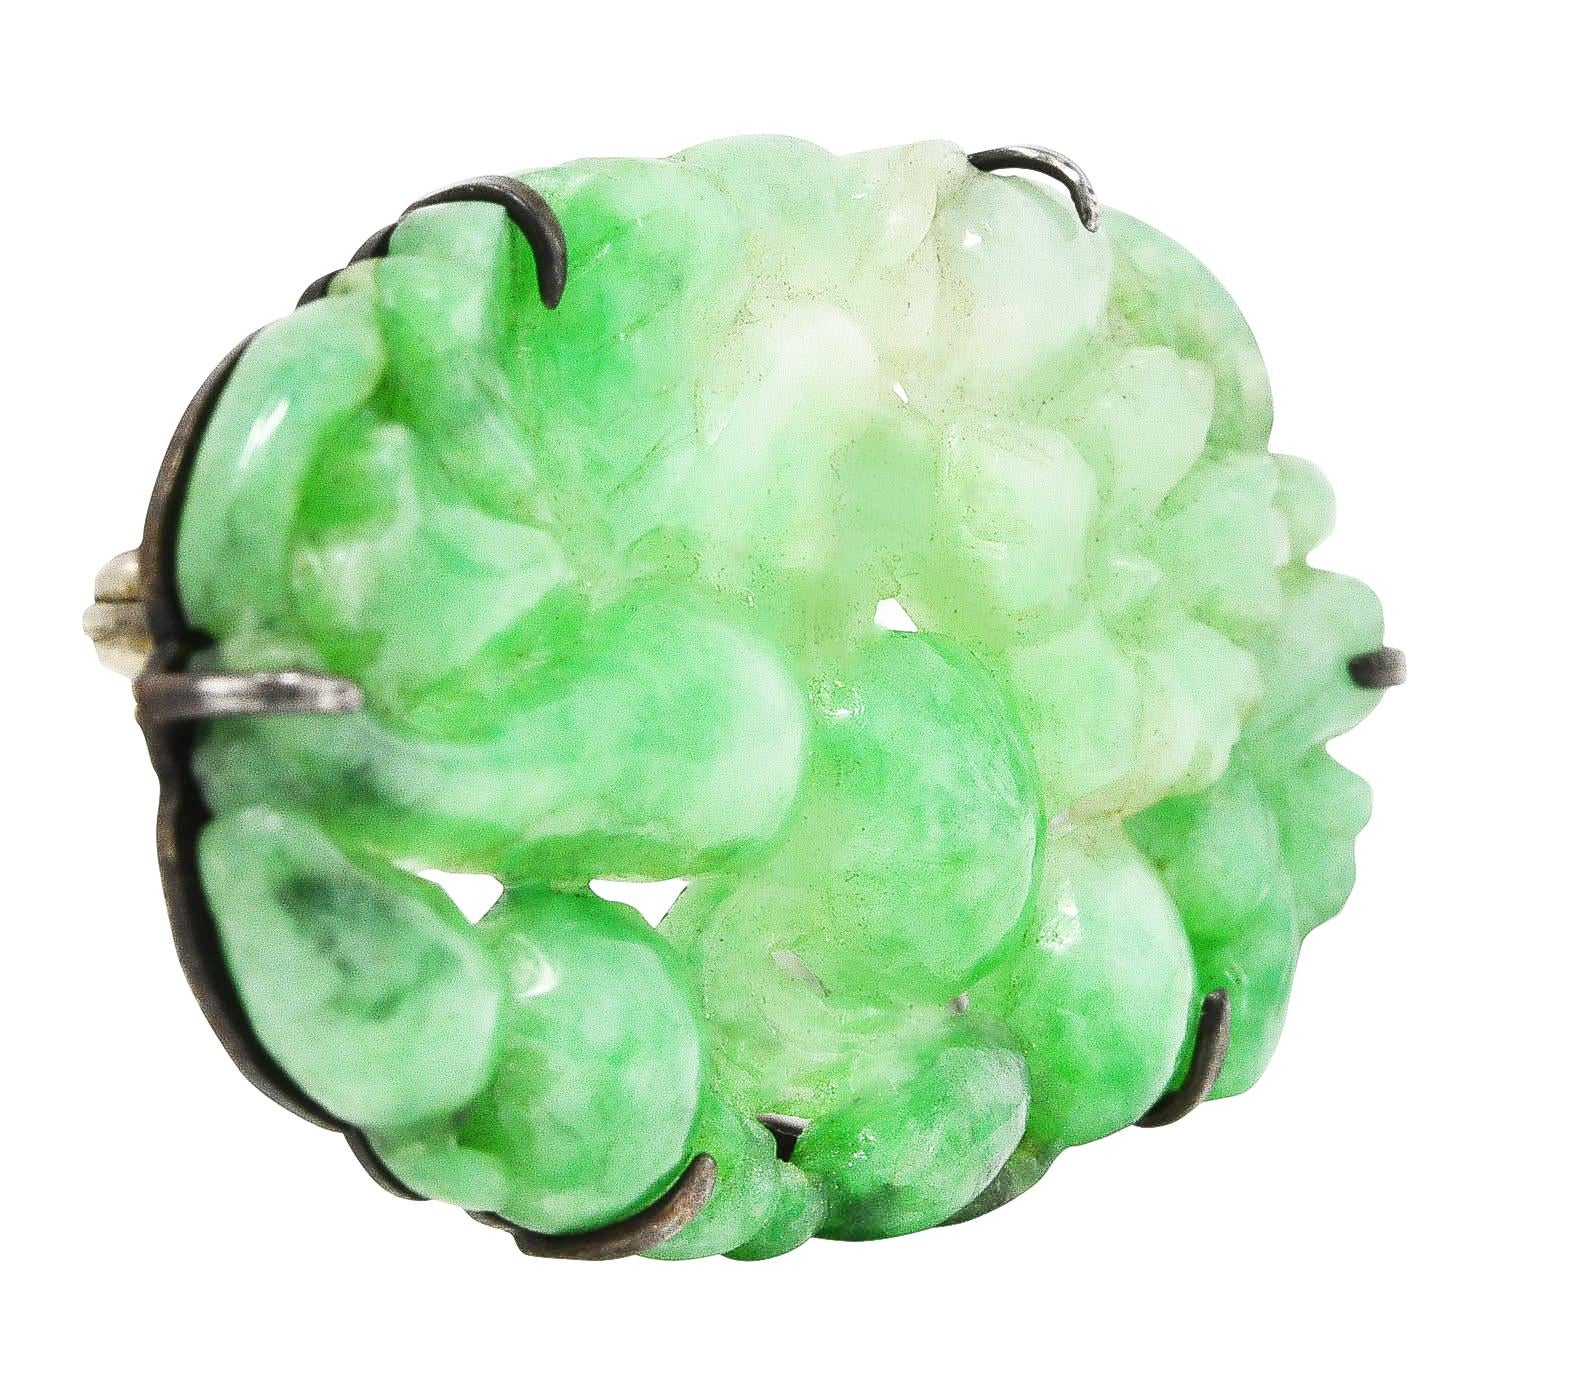 East to West oval brooch is comprised of intricately carved jadeite jade. Depicting scrolling and highly rendered foliate, fruit, and flowers. Translucent and moderately mottled green to very light pastel green. Talon set and mounted on a sterling